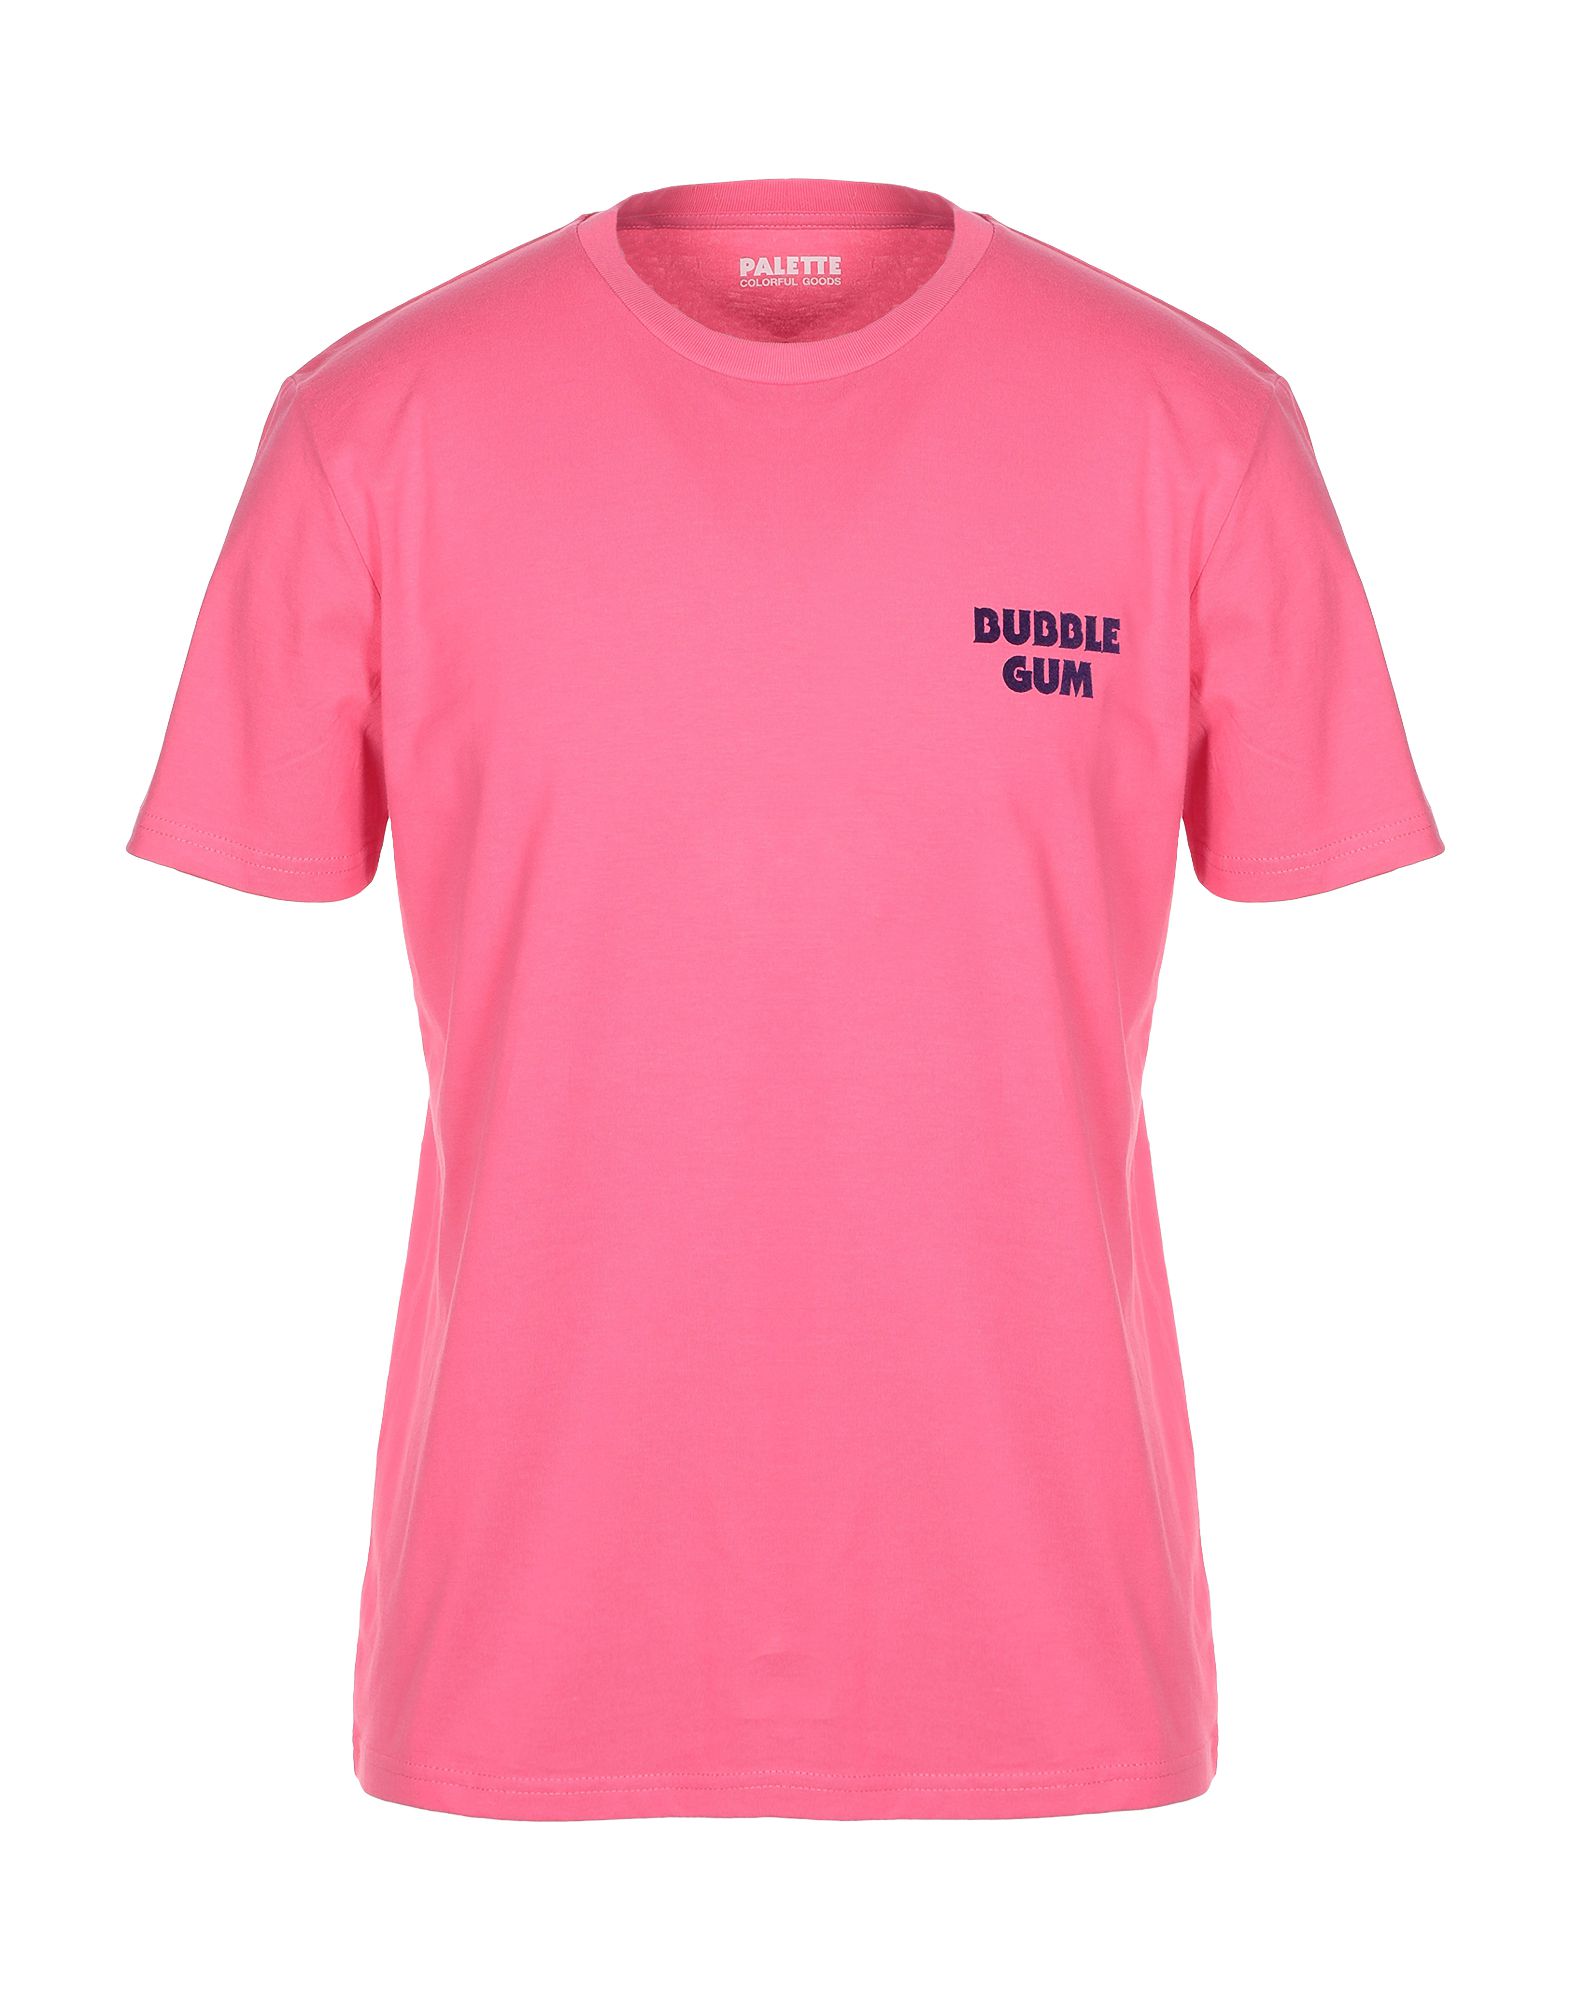 Palette Colorful Goods T-shirts In Pink